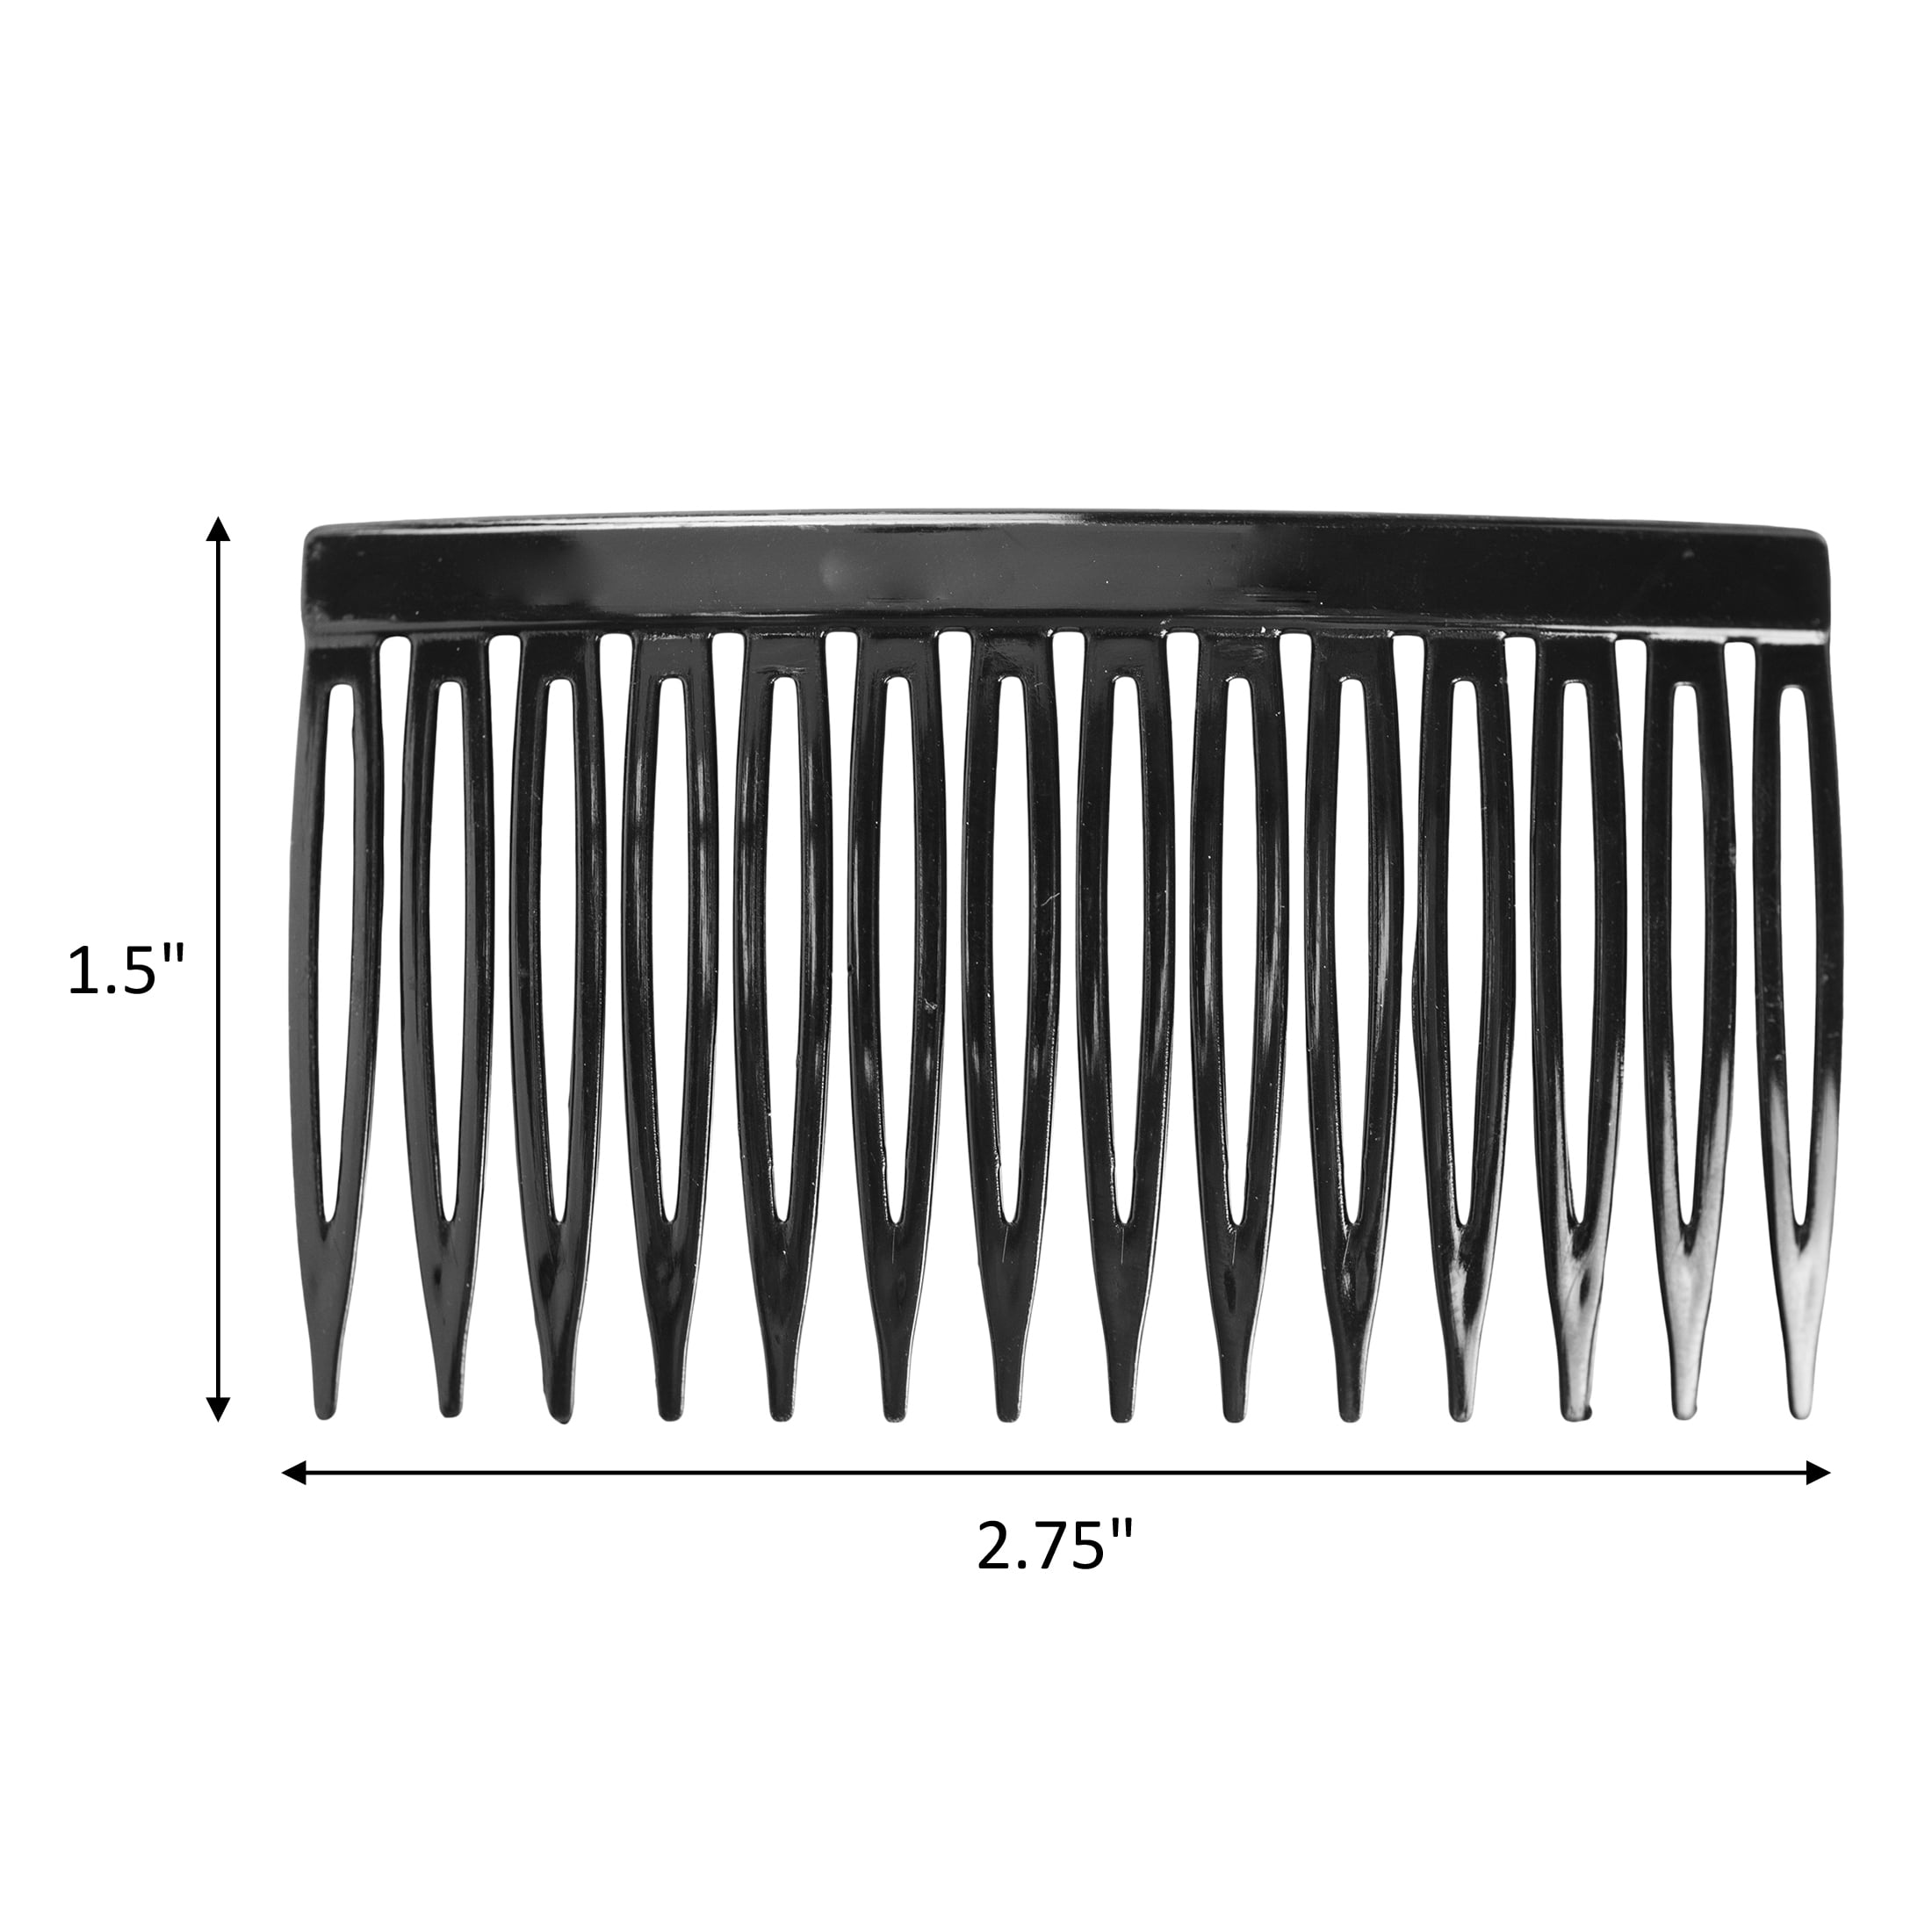 Scunci Banana Clip Combs Tortoise, Clear and Black